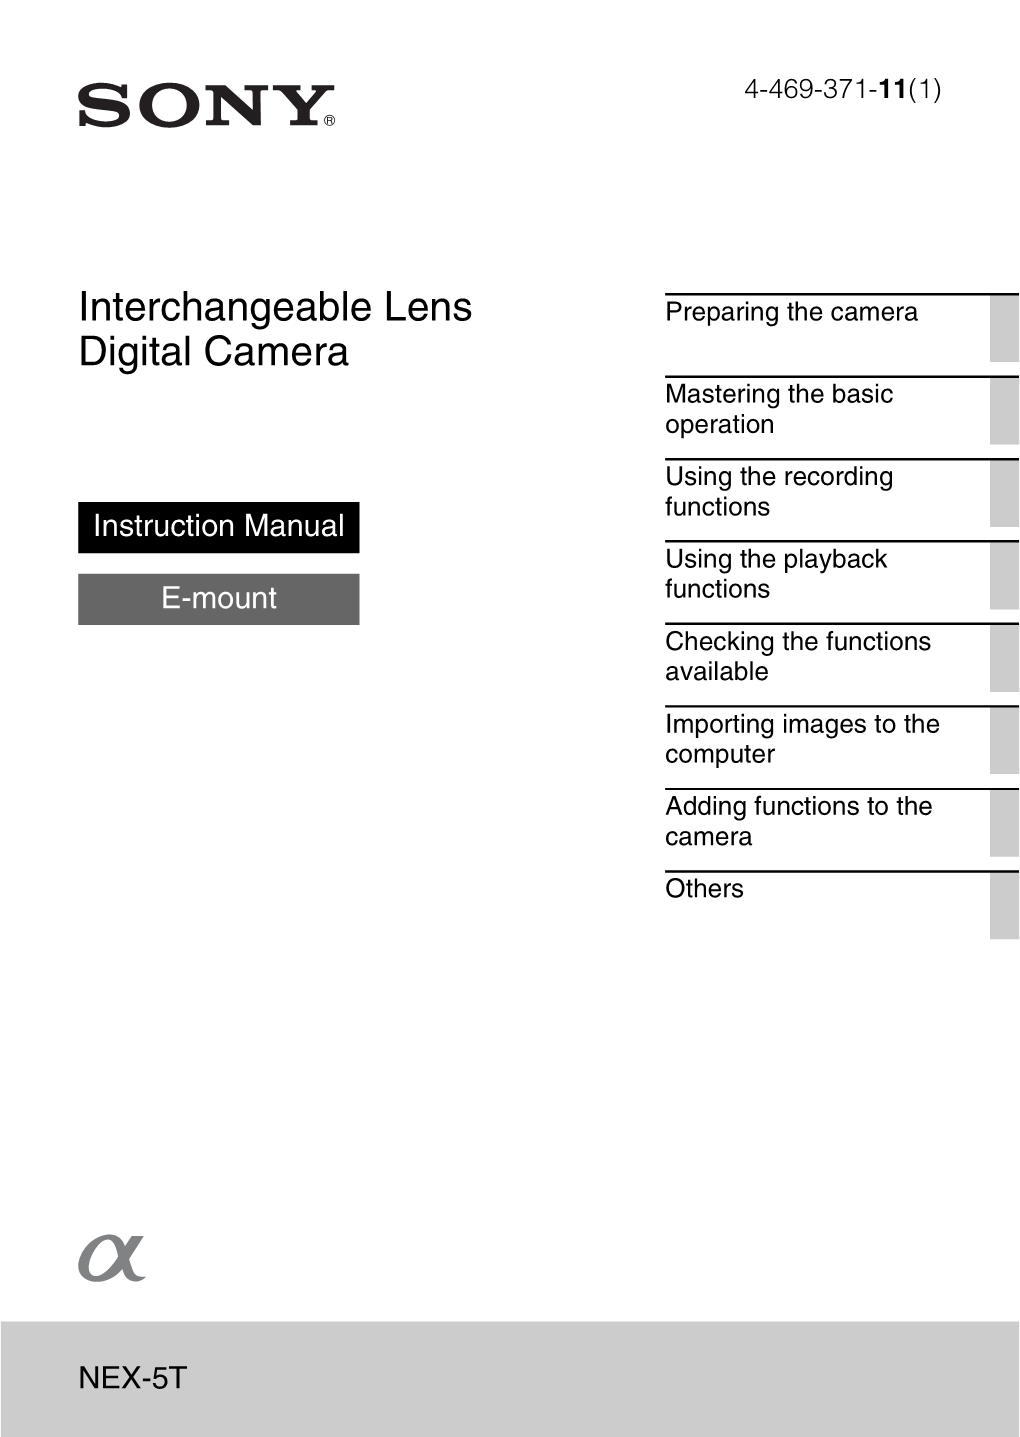 Interchangeable Lens Digital Camera Is in Compliance with the Essential Requirements and Other Relevant Provisions of Directive 1999/5/EC